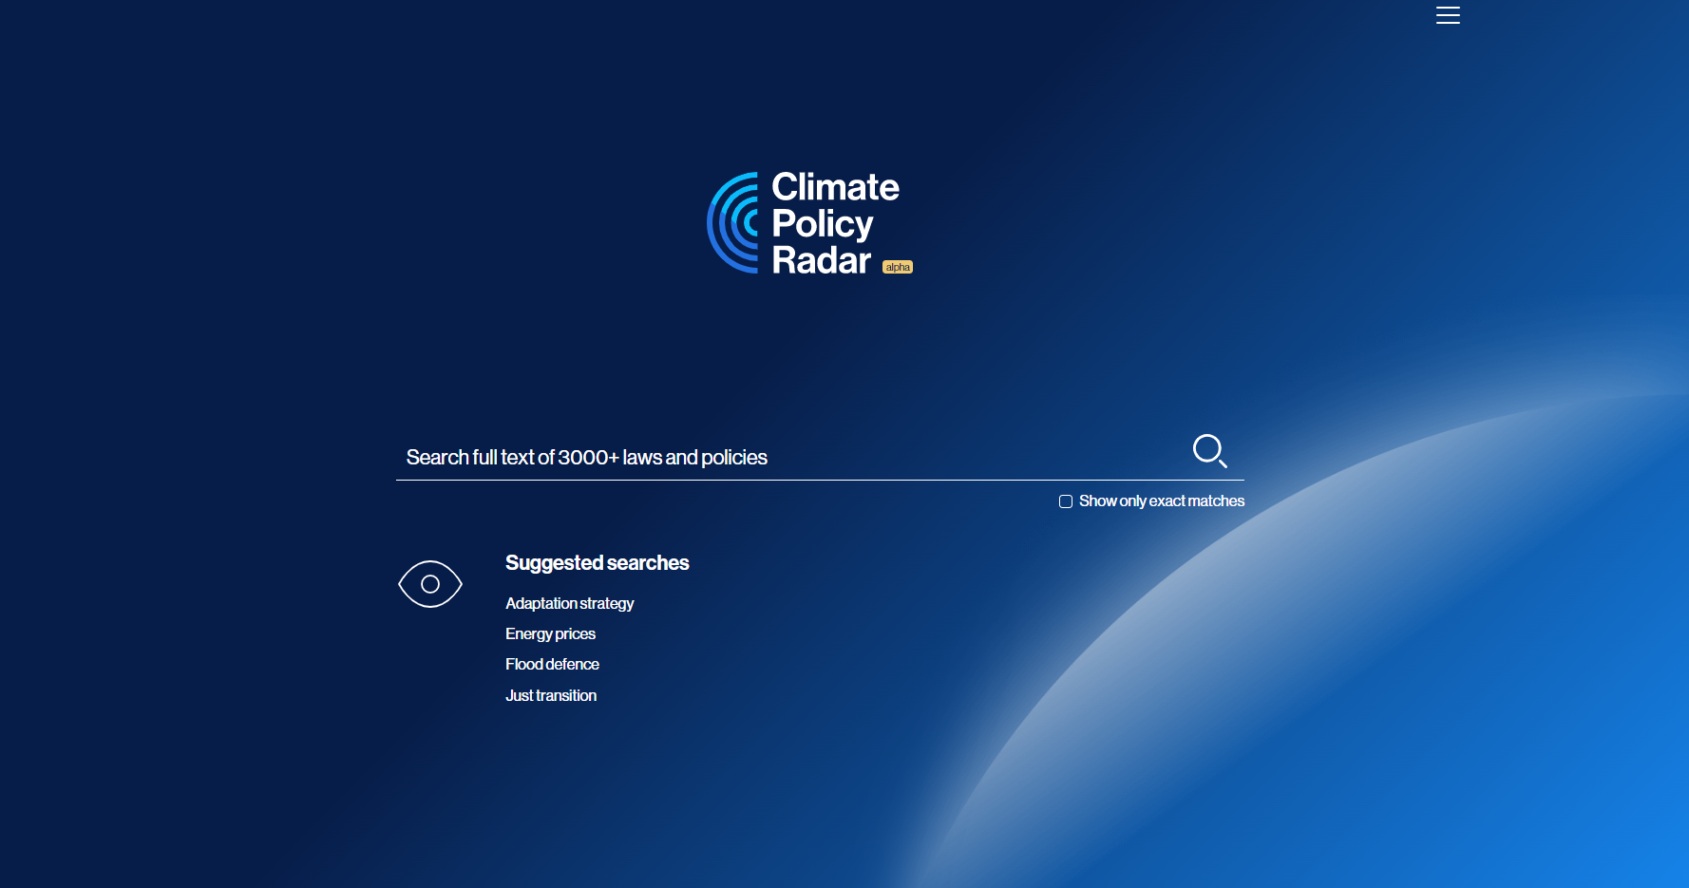 A screenshot of the Climate Policy Radar search platform